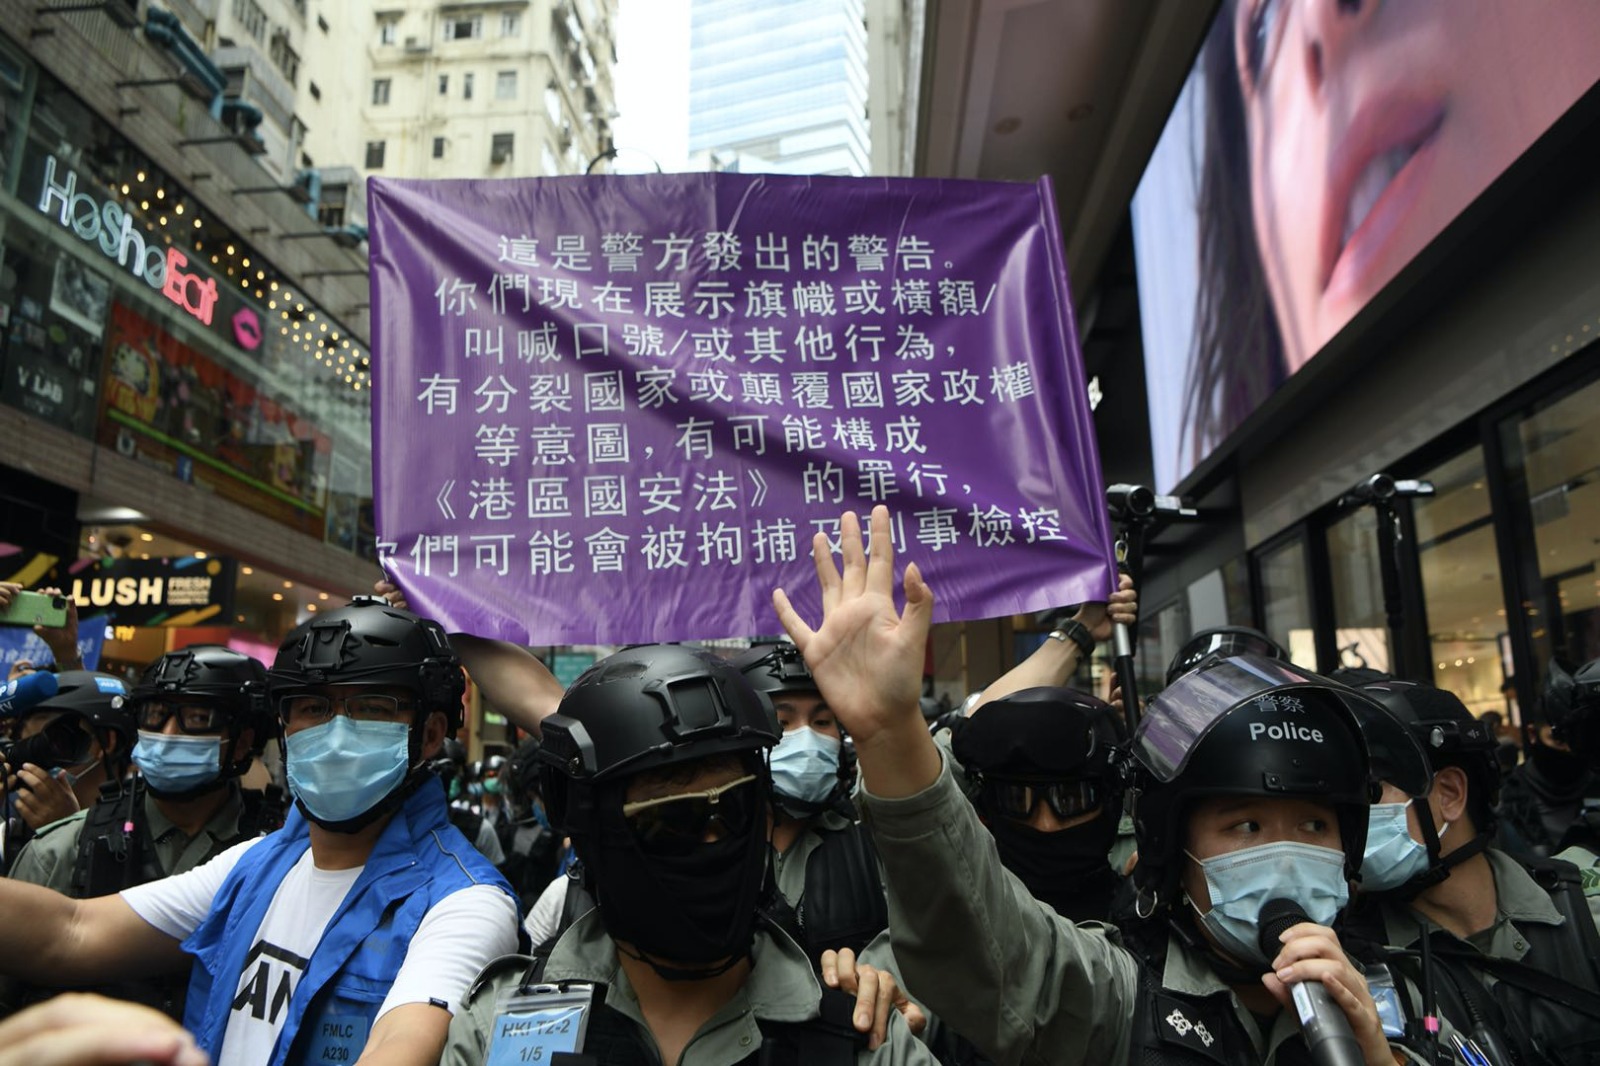 Hong Kong police hold up a purple flag, which warns the public that their actions may breach the national security law, on July 1, 2020. Photo via Facebook/Hong Kong Police